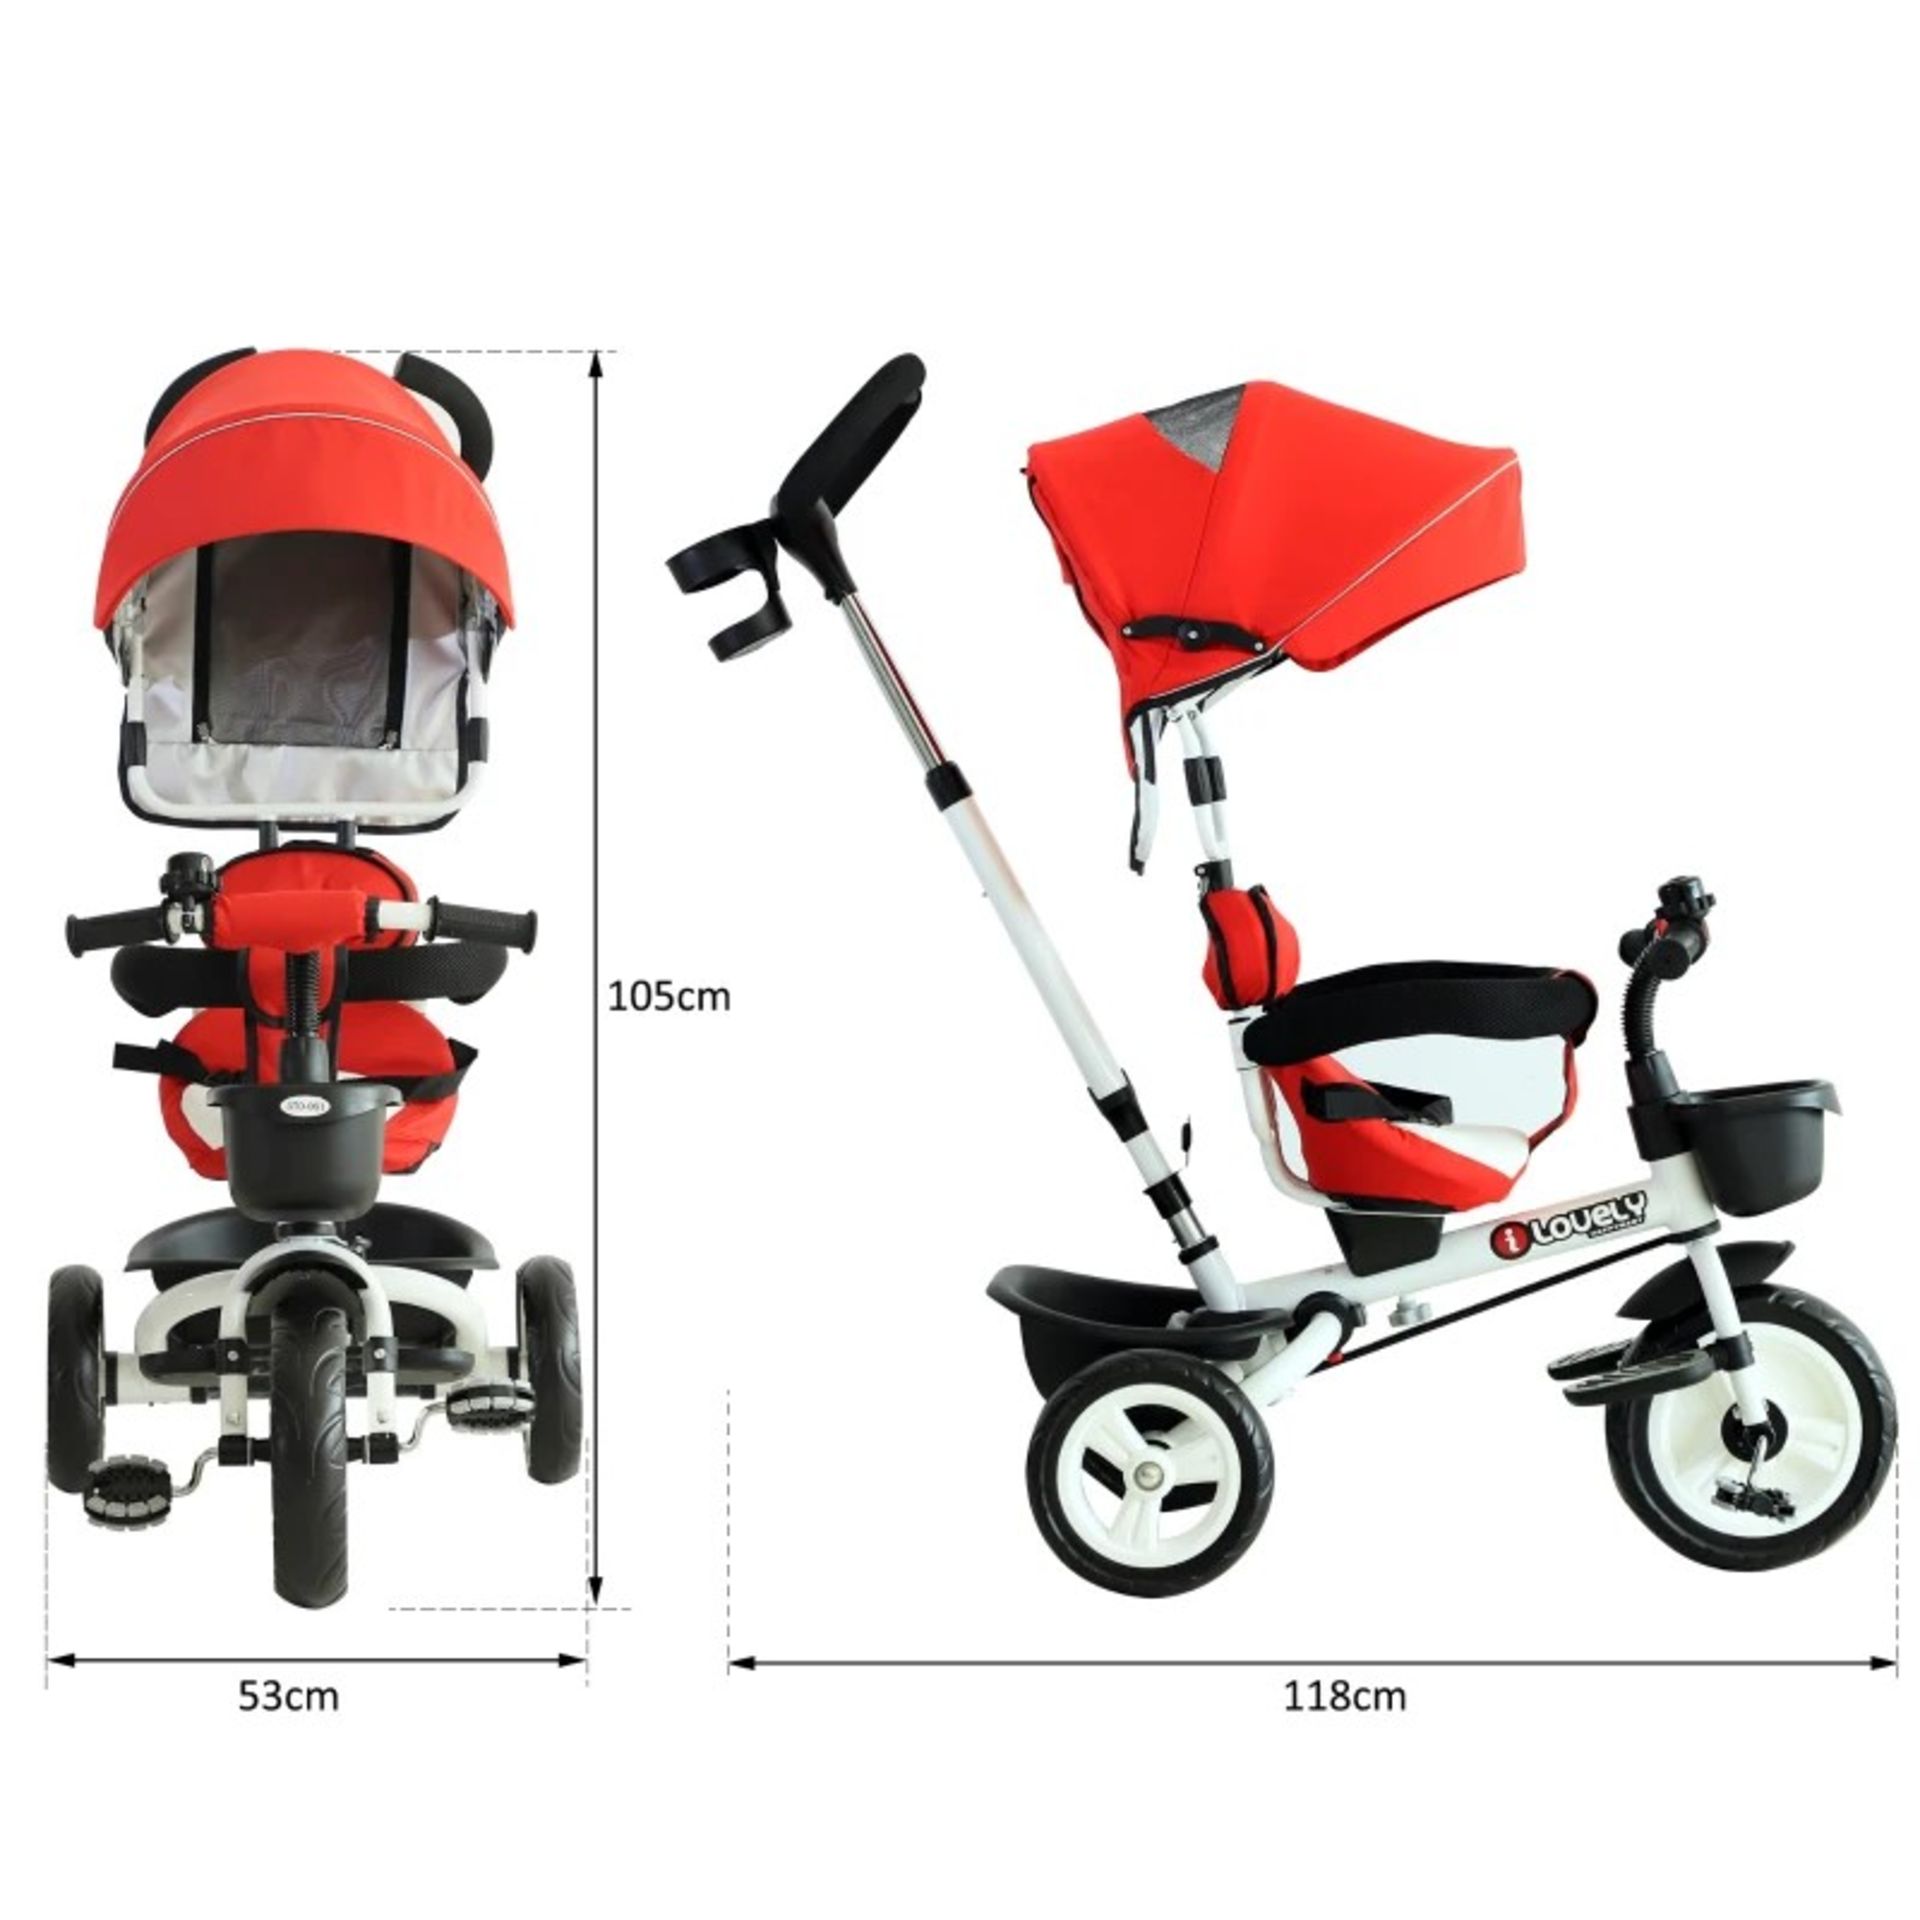 RRP £84.99 - 4-in-1 Kids Tricycle Stroller W/ Canopy-Red - Image 2 of 4